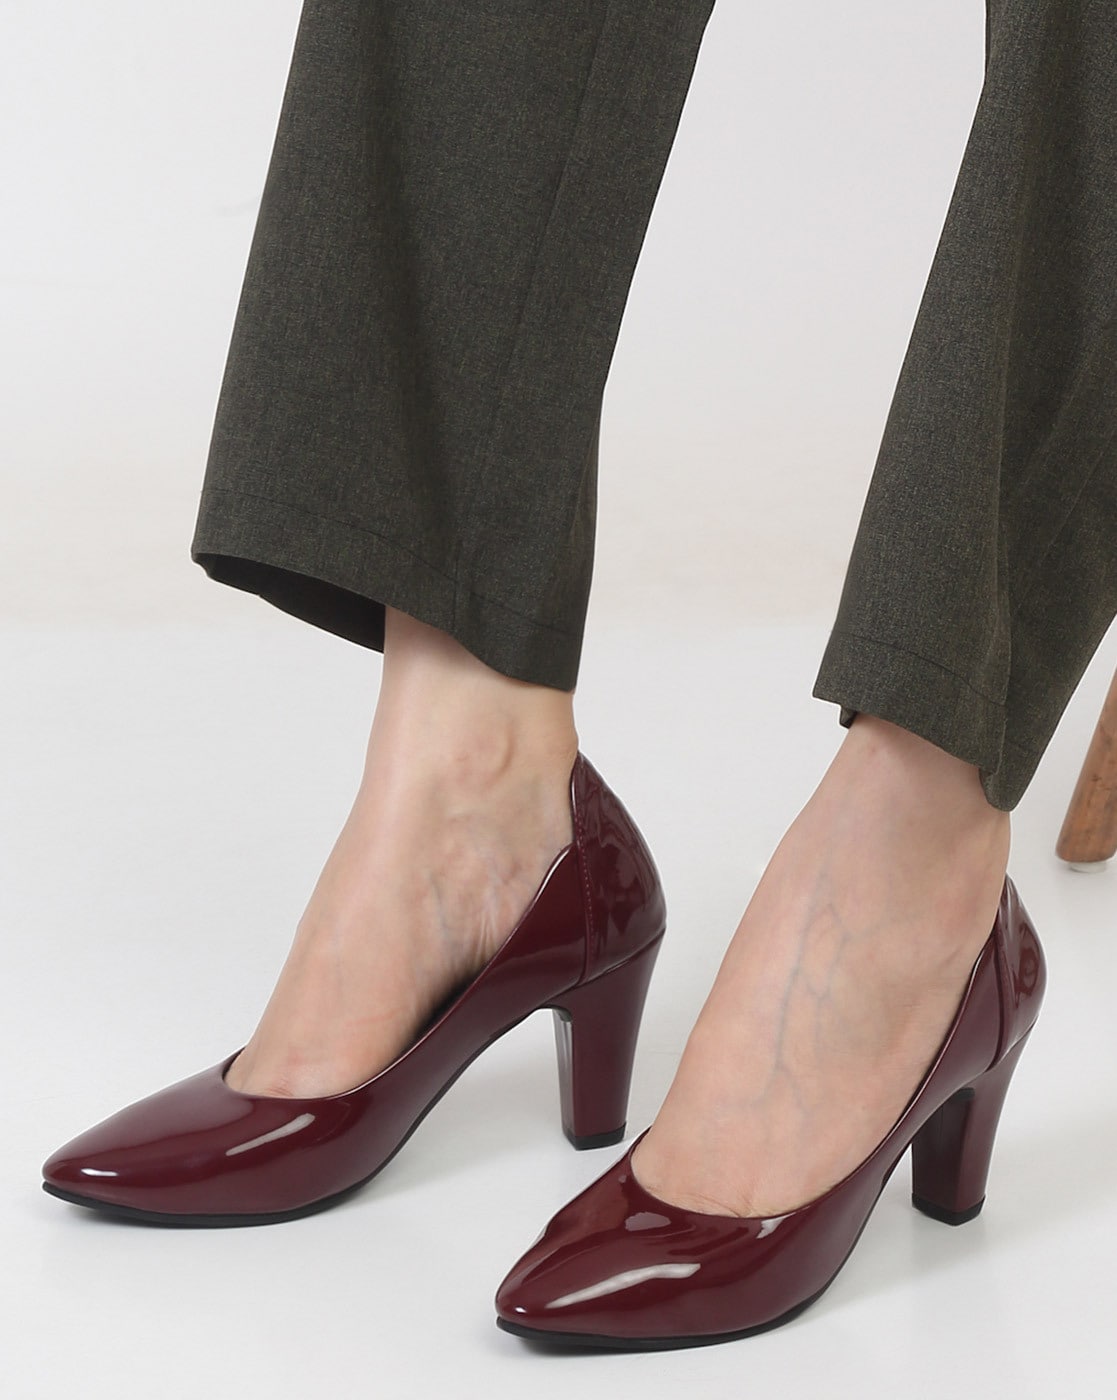 Buy Slip On Pointed Toe Pumps High Heel Party Shoes - Maroon | Fashion |  DressFair.com